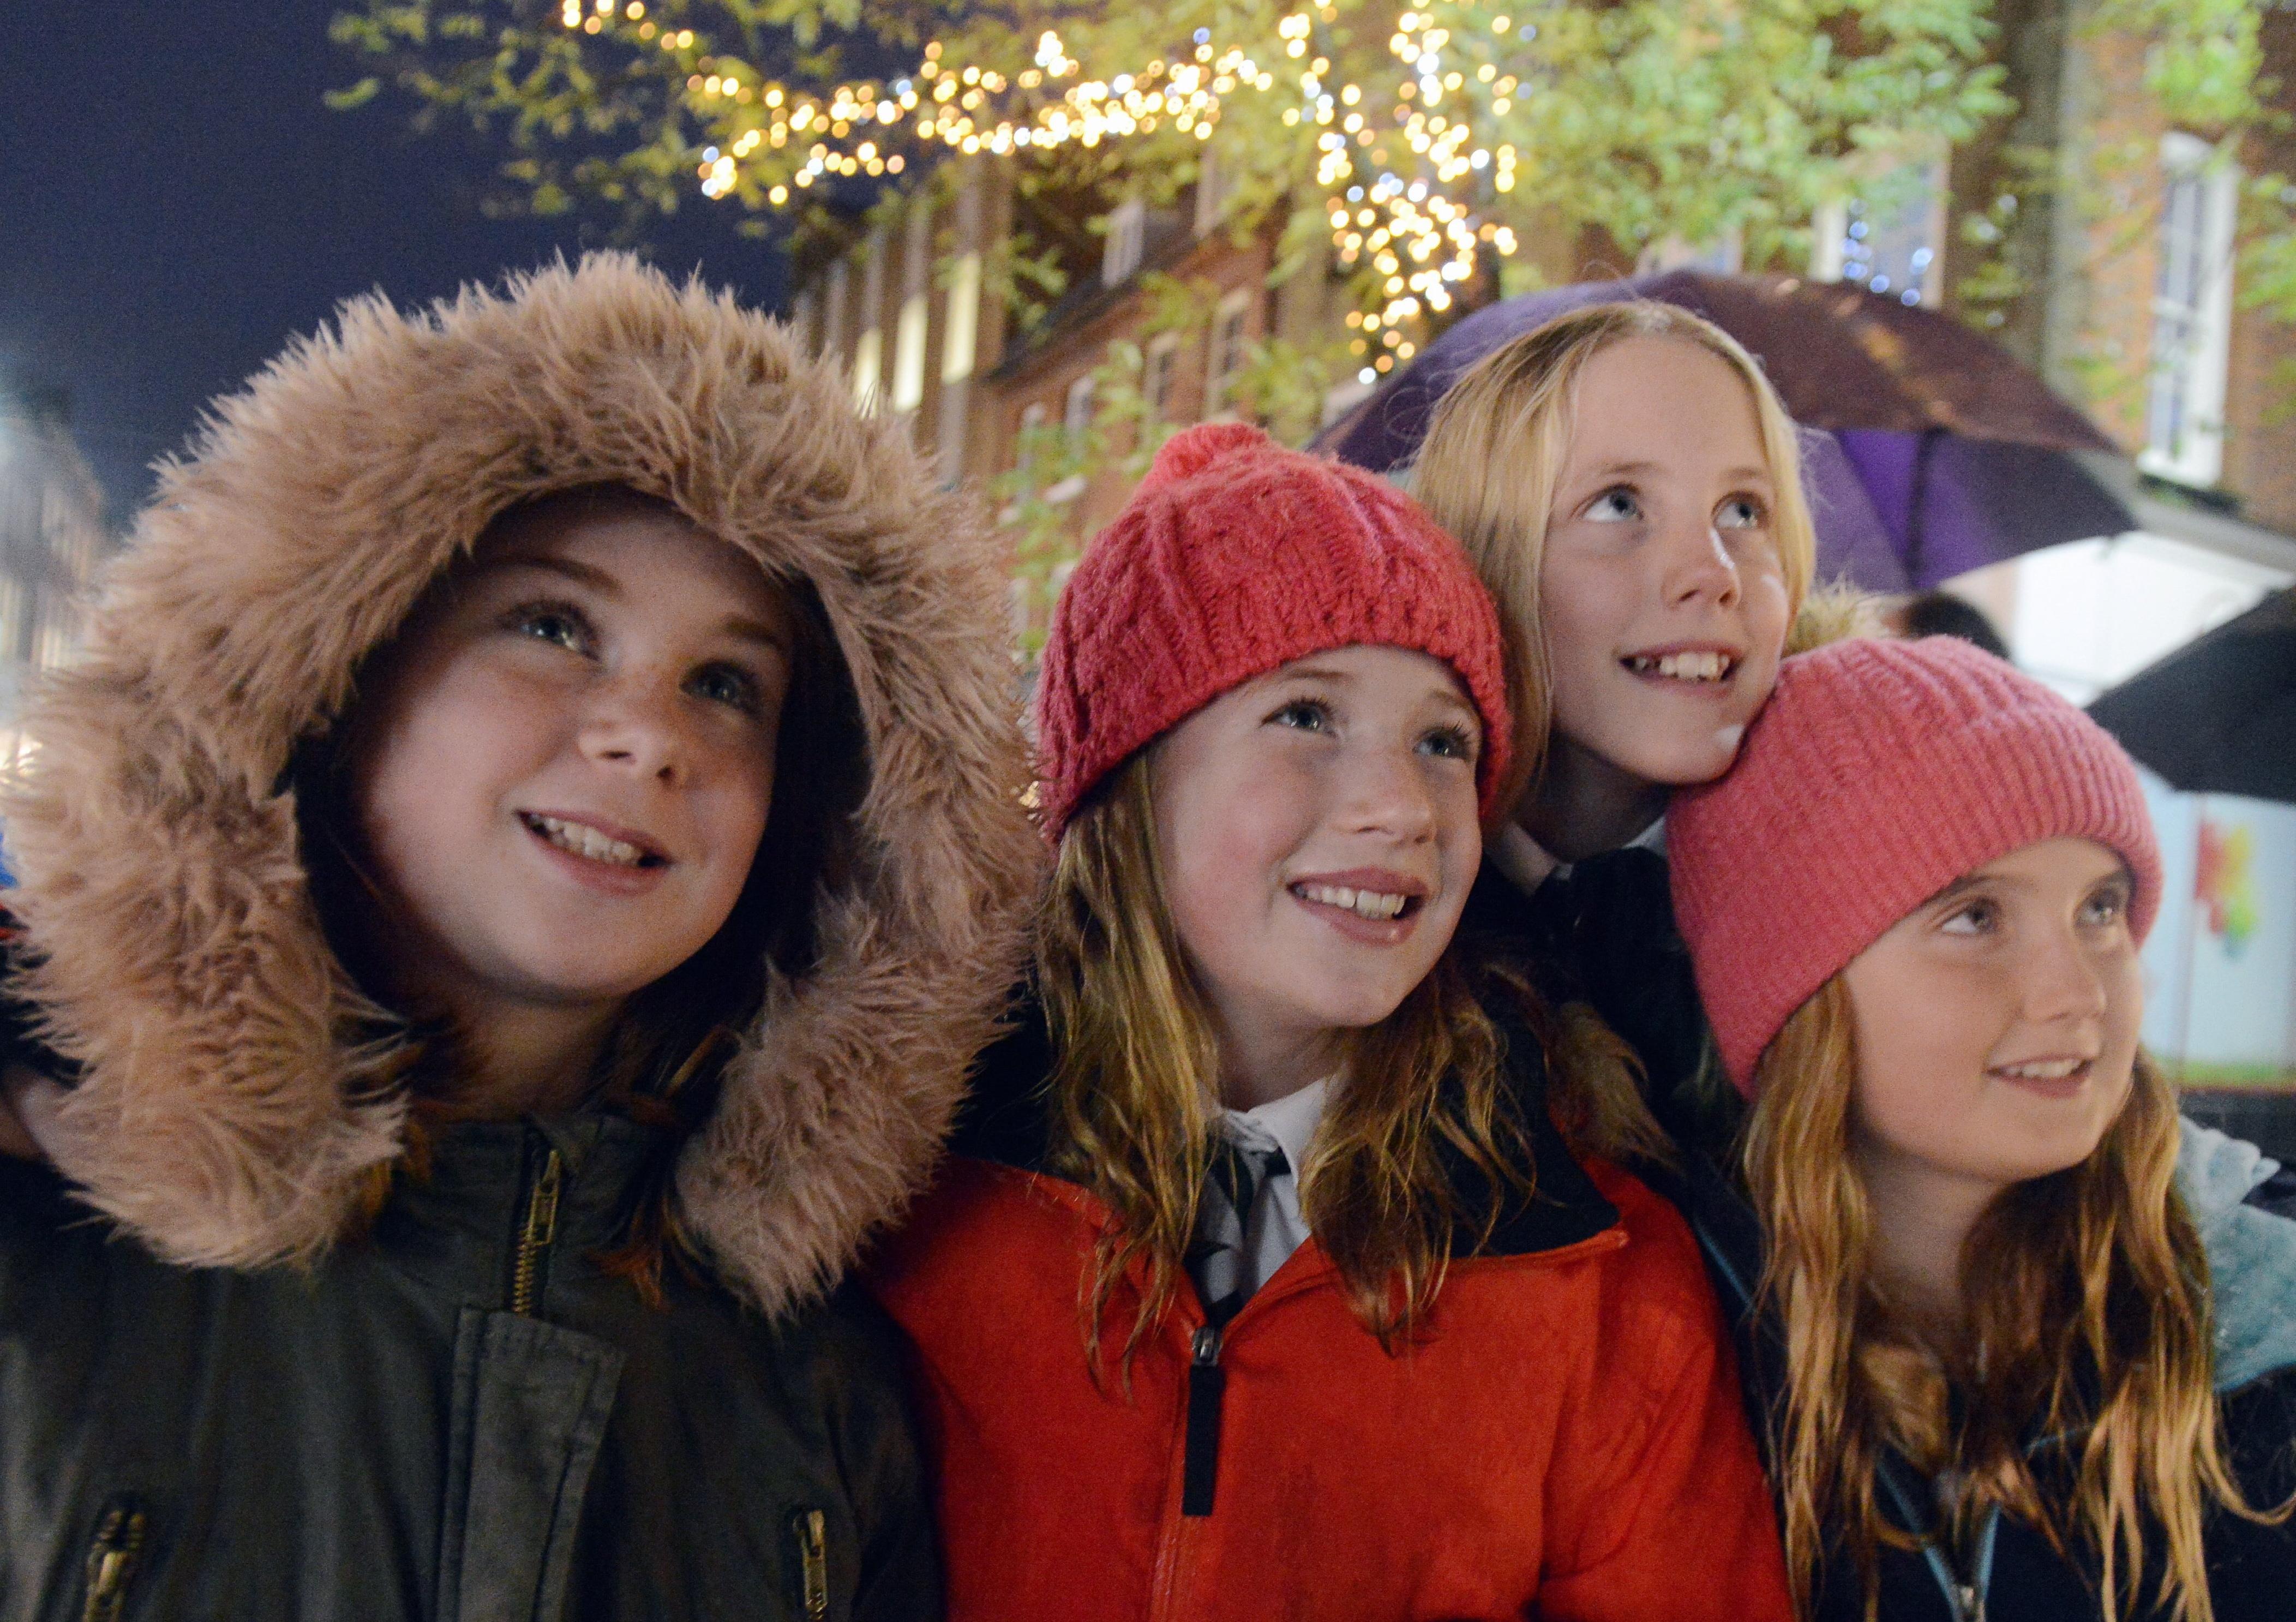 The Festival of Light celebration and Parade took place before Chichester's Christmas lights were switched on